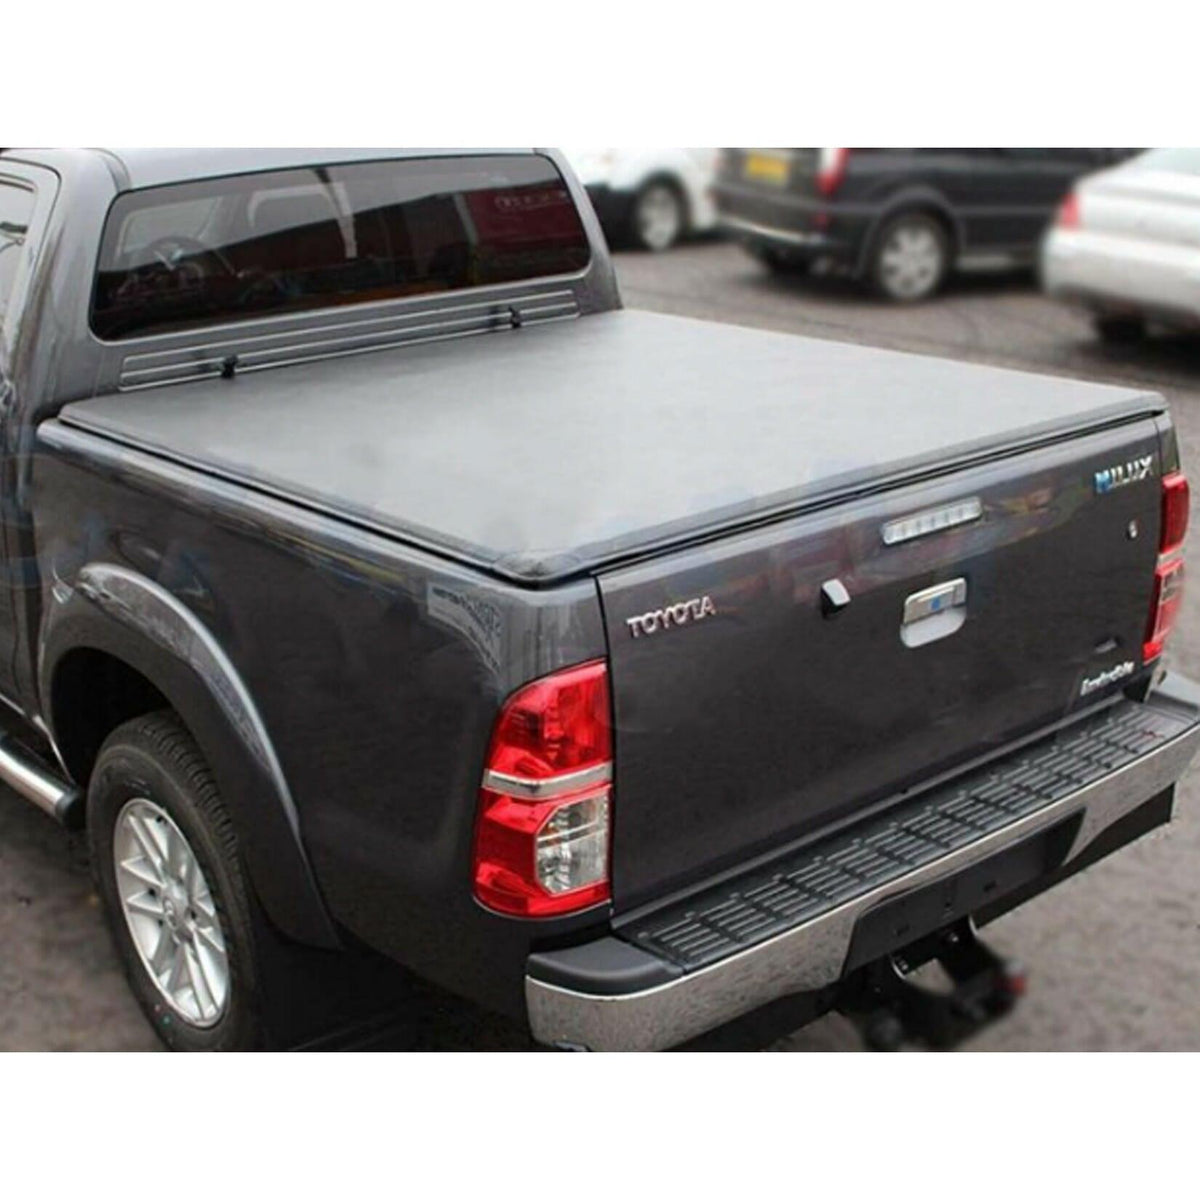 TOYOTA HILUX MK8 2016 ON - DOUBLE CAB - STX SOFT ROLL UP TONNEAU COVER - Storm Xccessories2